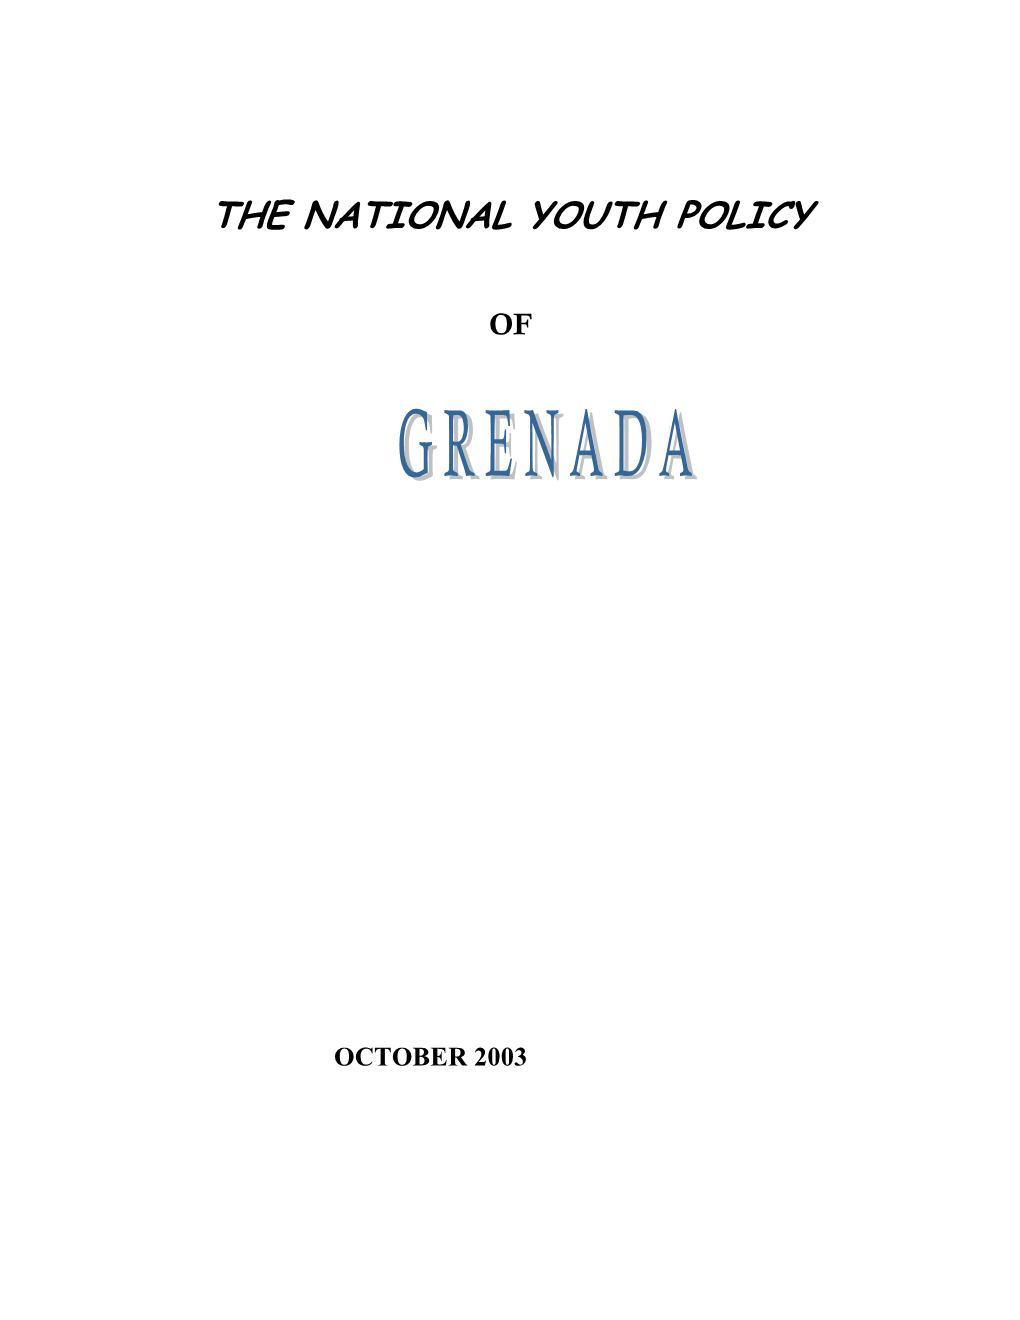 The National Youth Policy